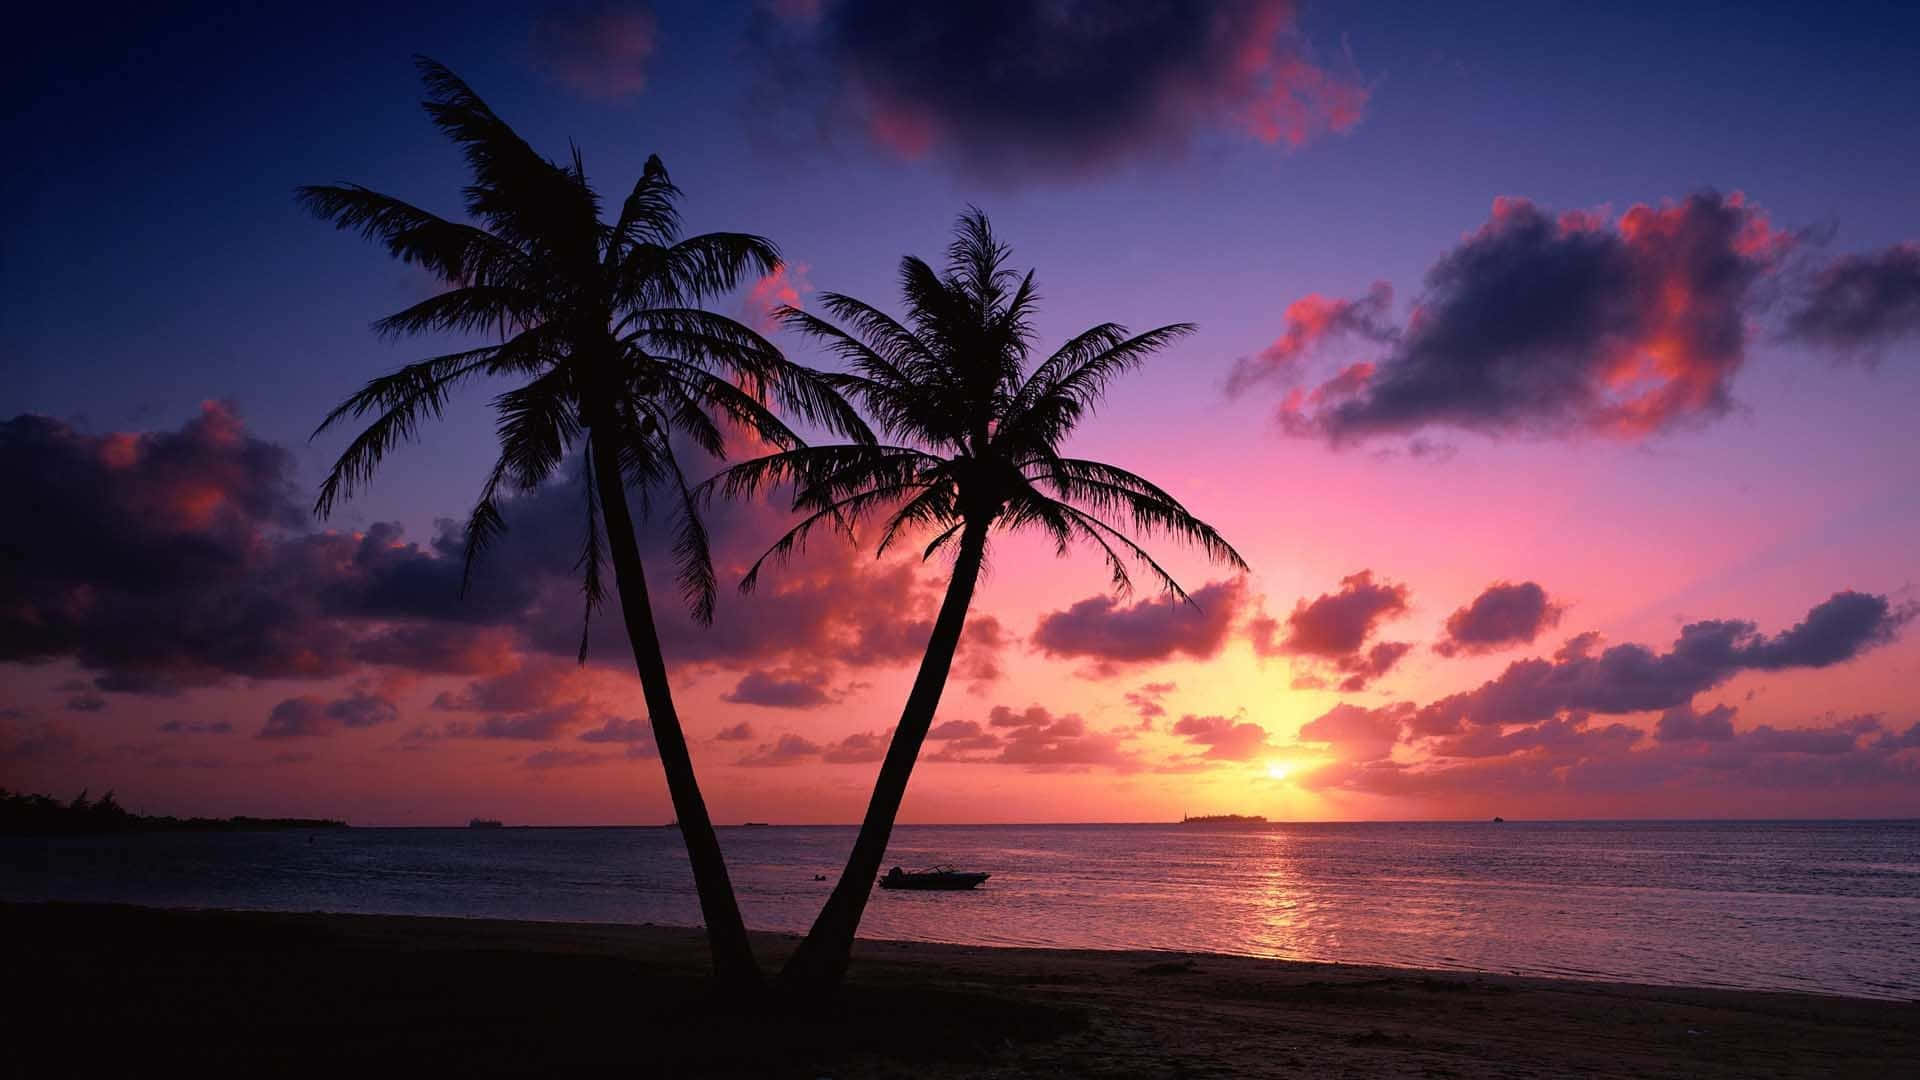 Relax by the beach and enjoy a beautiful sunset Wallpaper